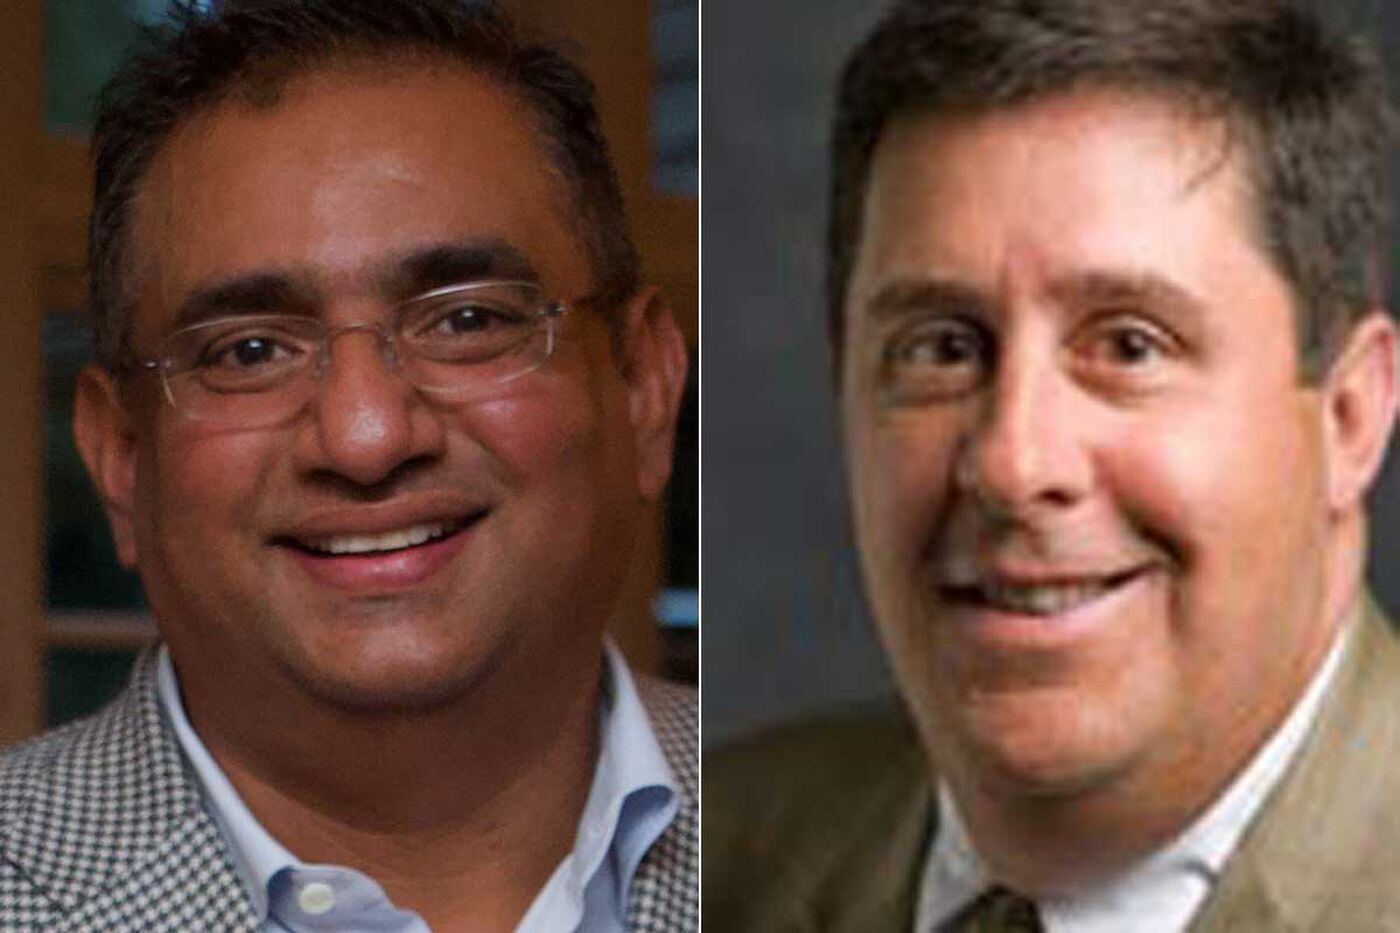 Raza Bokhari was named CEO of Canadian cannabis company FSD Pharma on June 3. Edward Brennan is the firm's president. Both men are long-time Philadelphians who will run the company from Philadelphia.